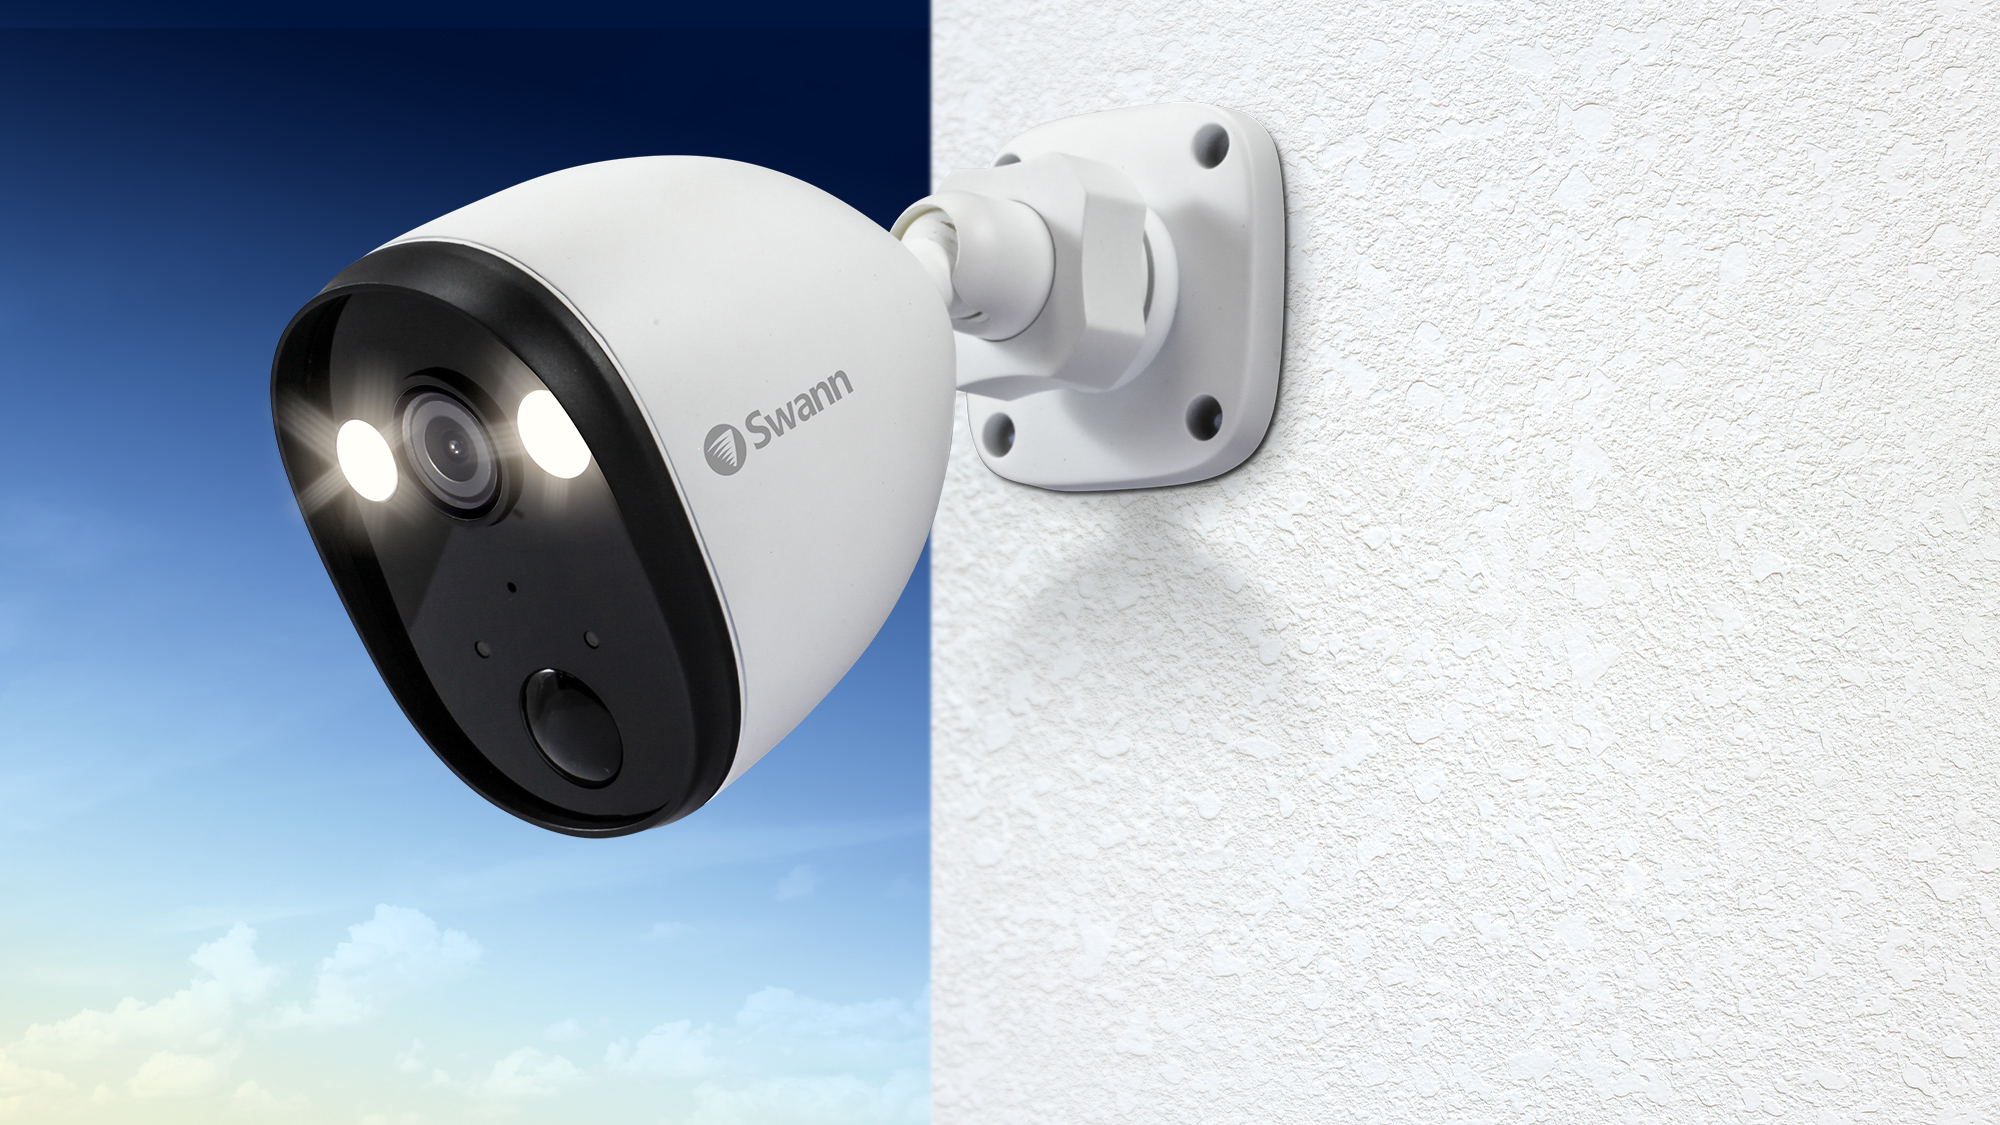 Swann 1080p Outdoor Spotlight Camera Home, Safe Home: Swann Security Camera Giveaway Starts Today